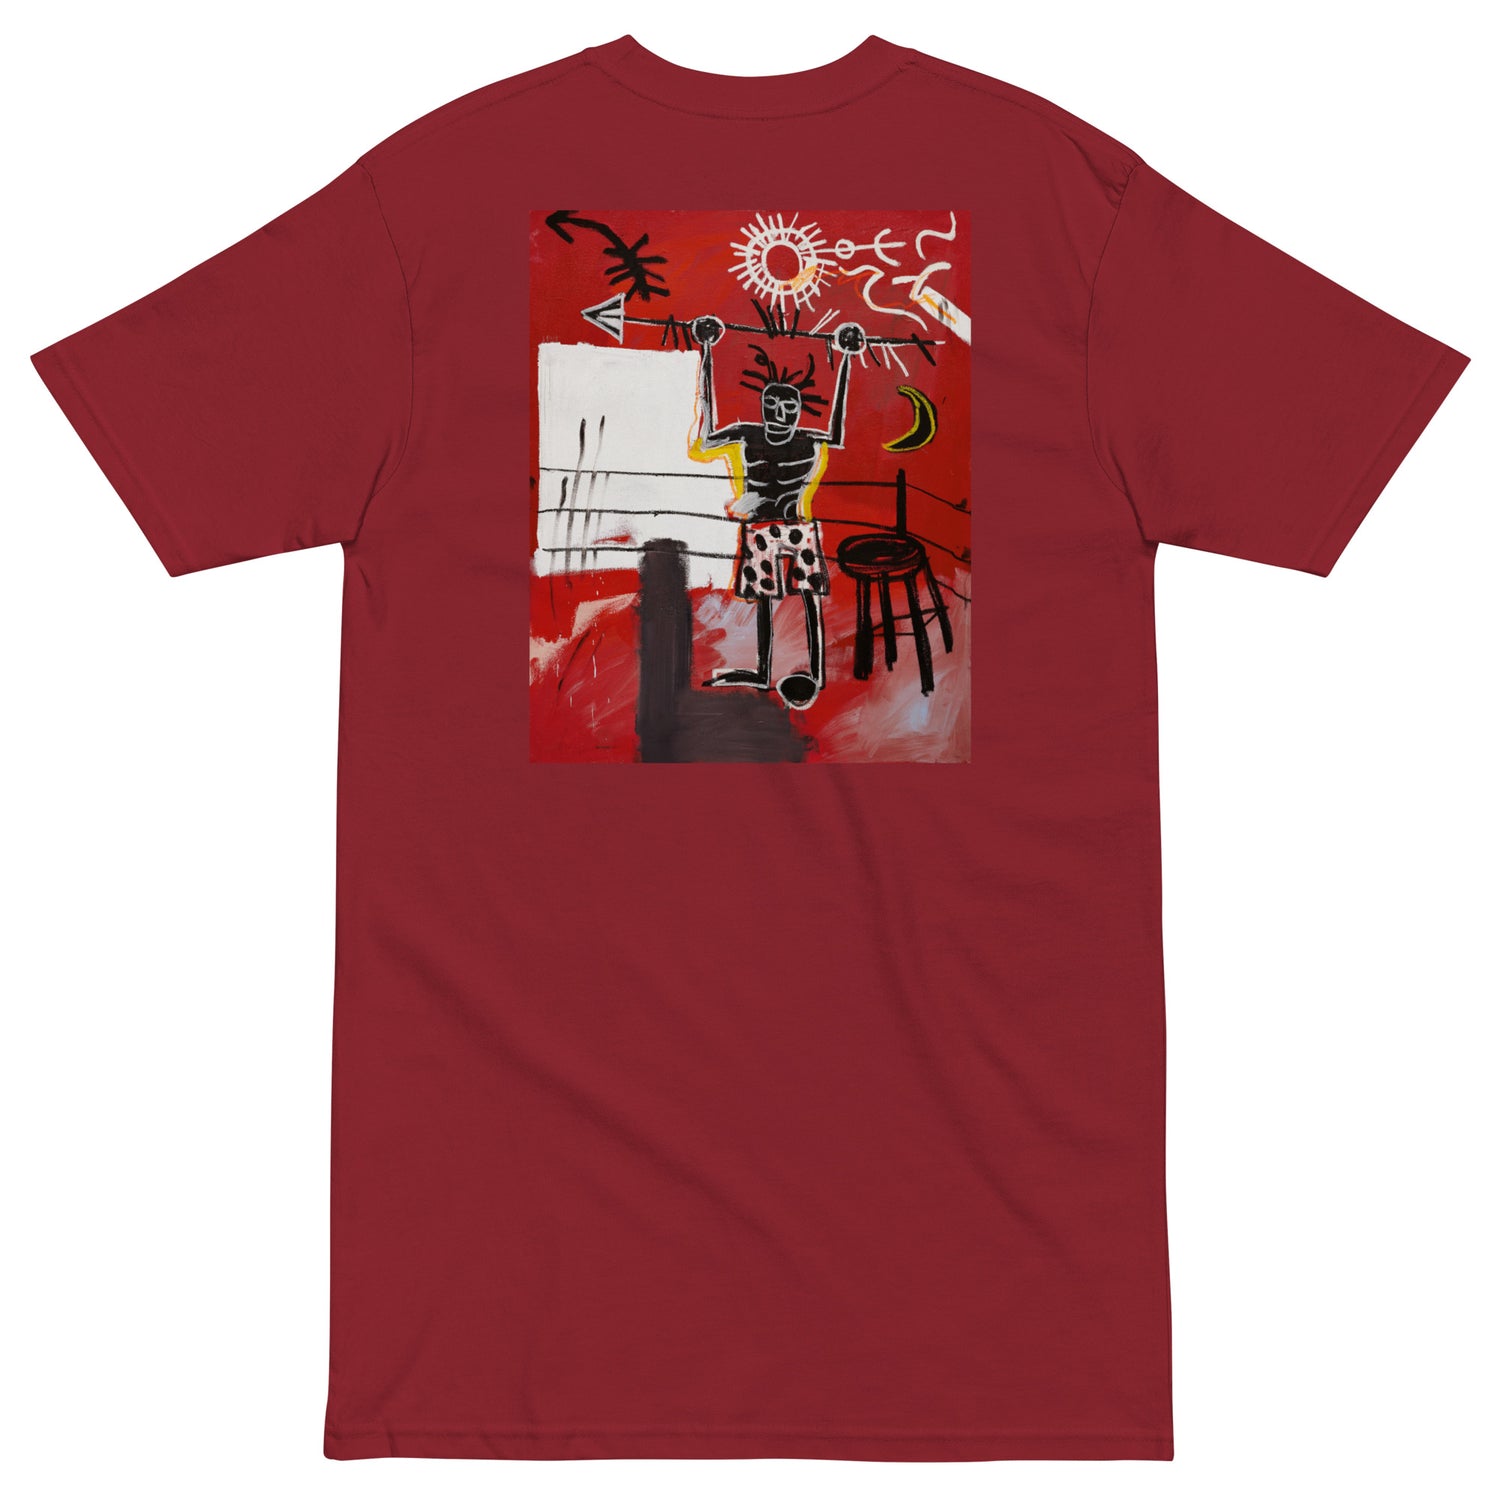 Jean-Michel Basquiat "The Ring" 1981 Artwork Embroidered + Printed Premium Streetwear T-shirt Red